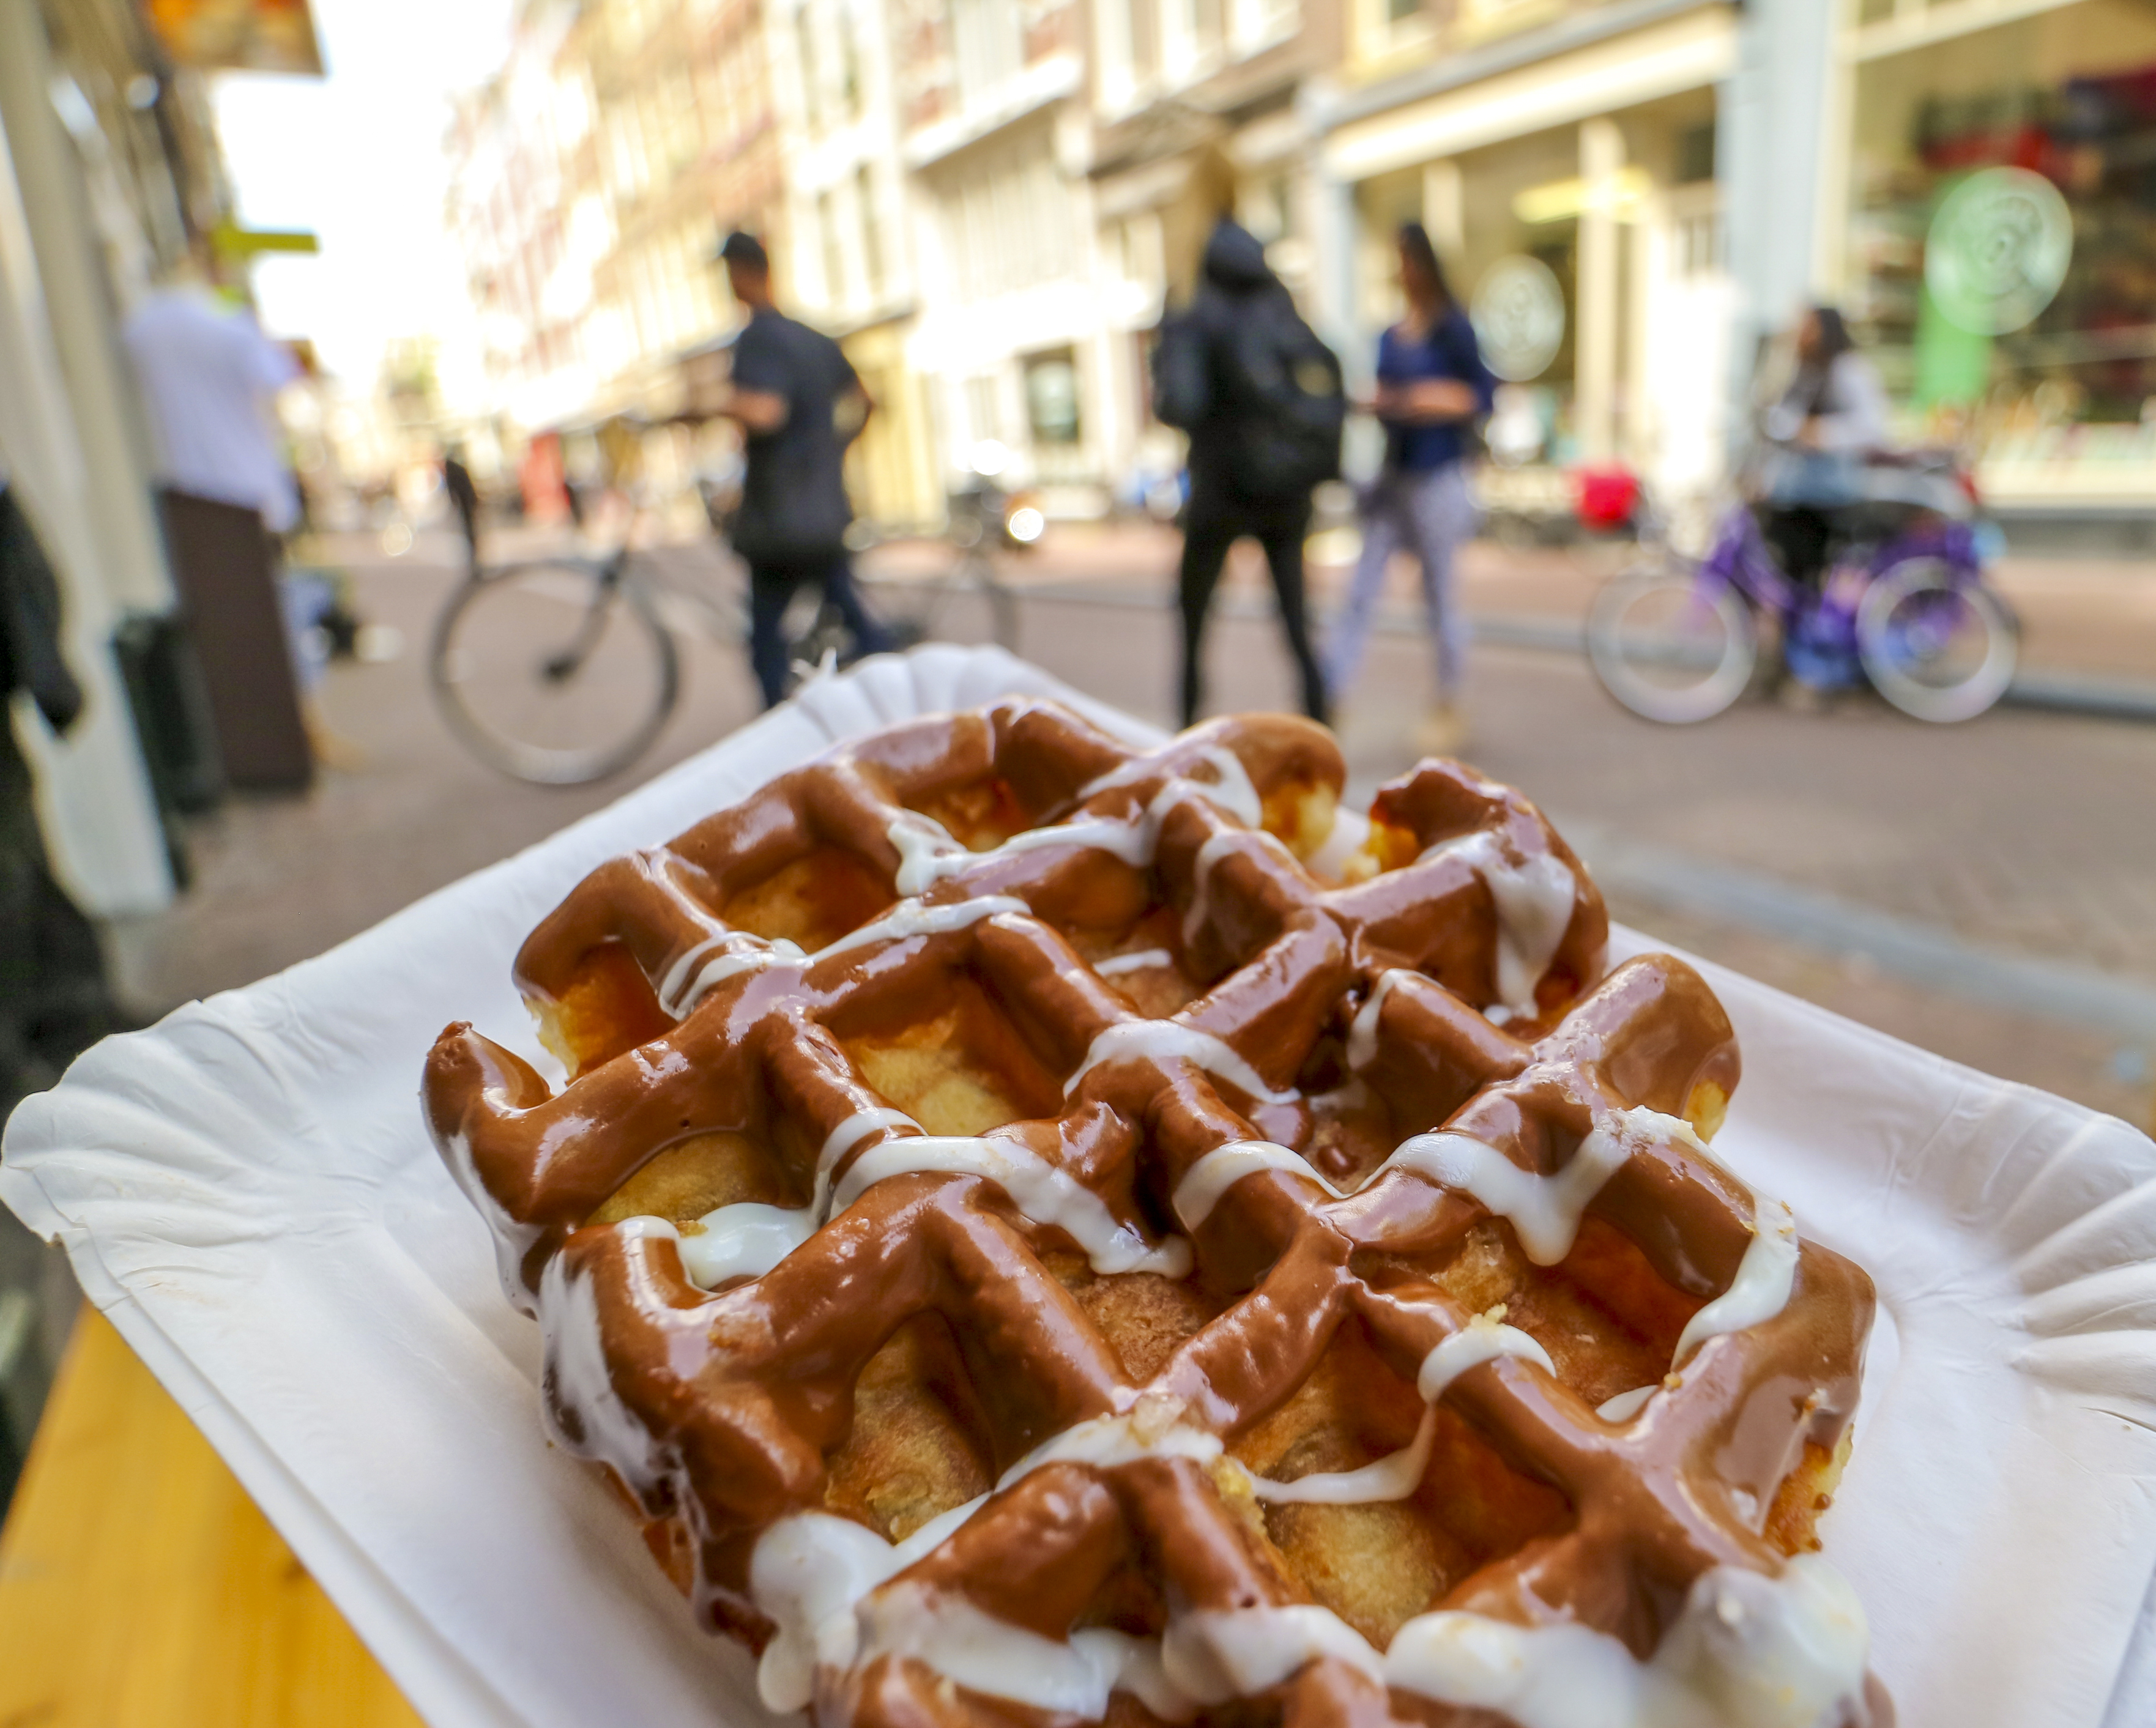 Study abroad in the Netherlands to learn about Dutch culture and their progressive approach to LGBTQ+ rights, women and gender studies, and sex education. Belgian waffle with chocolate and vanilla icing